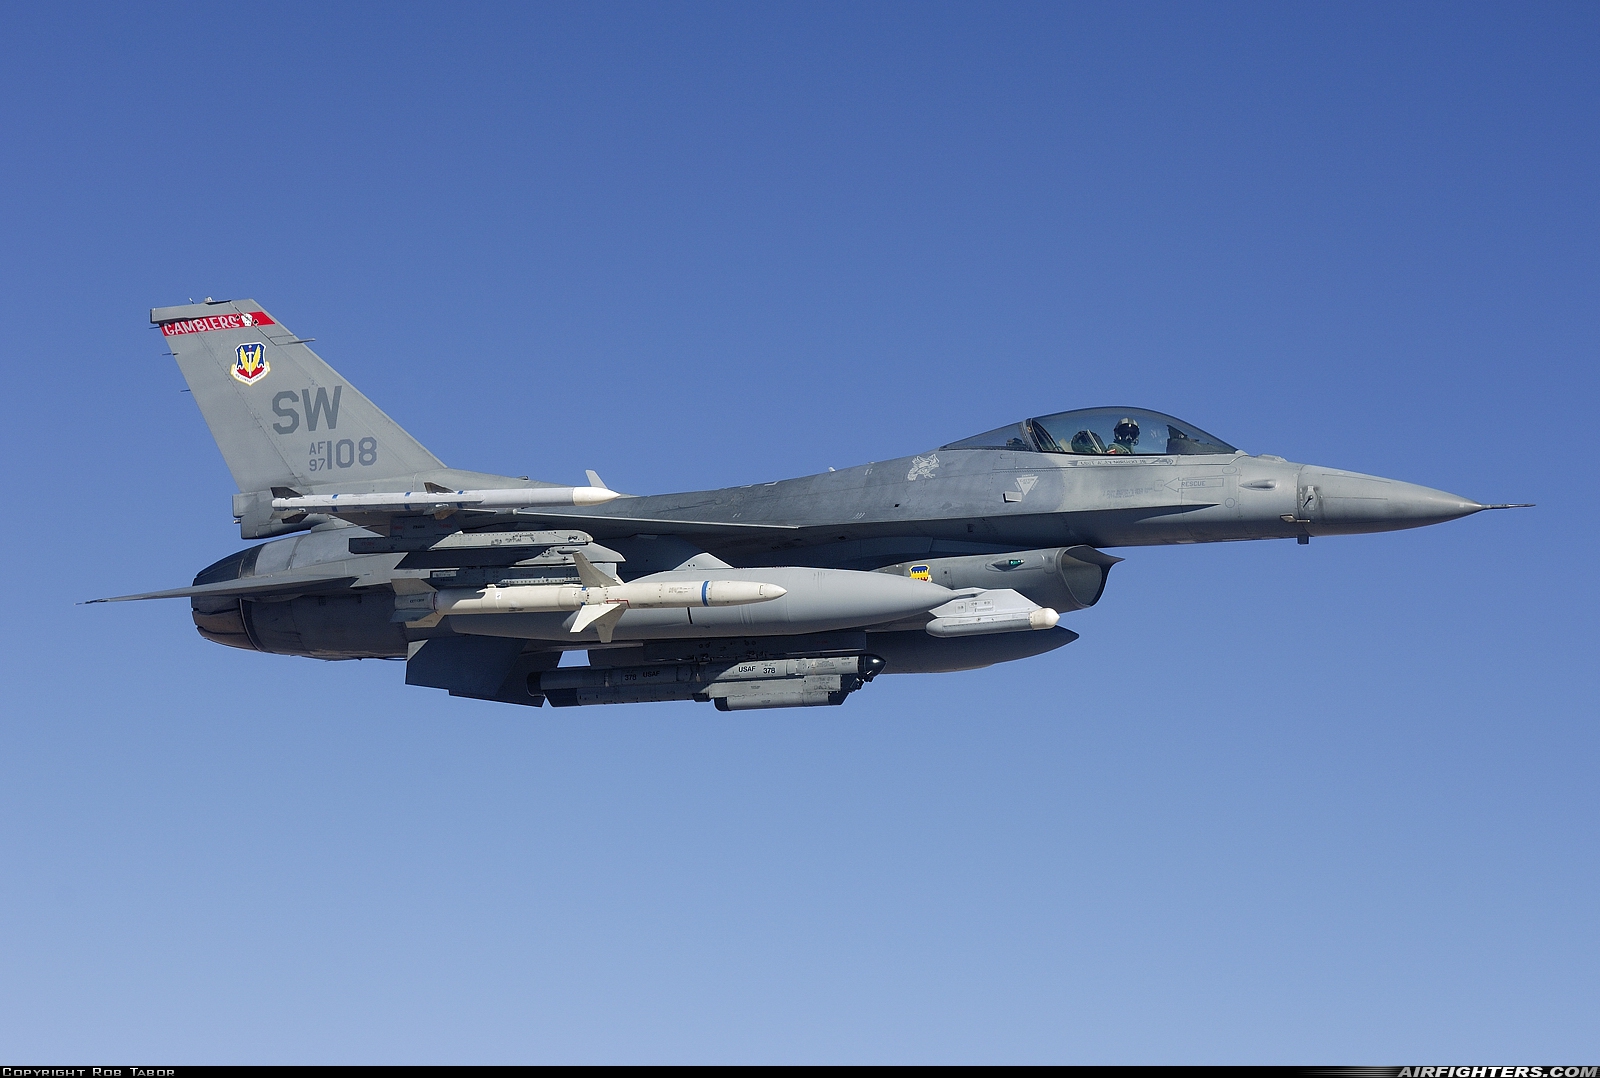 USA - Air Force General Dynamics F-16C Fighting Falcon 97-0108 at In Flight, USA